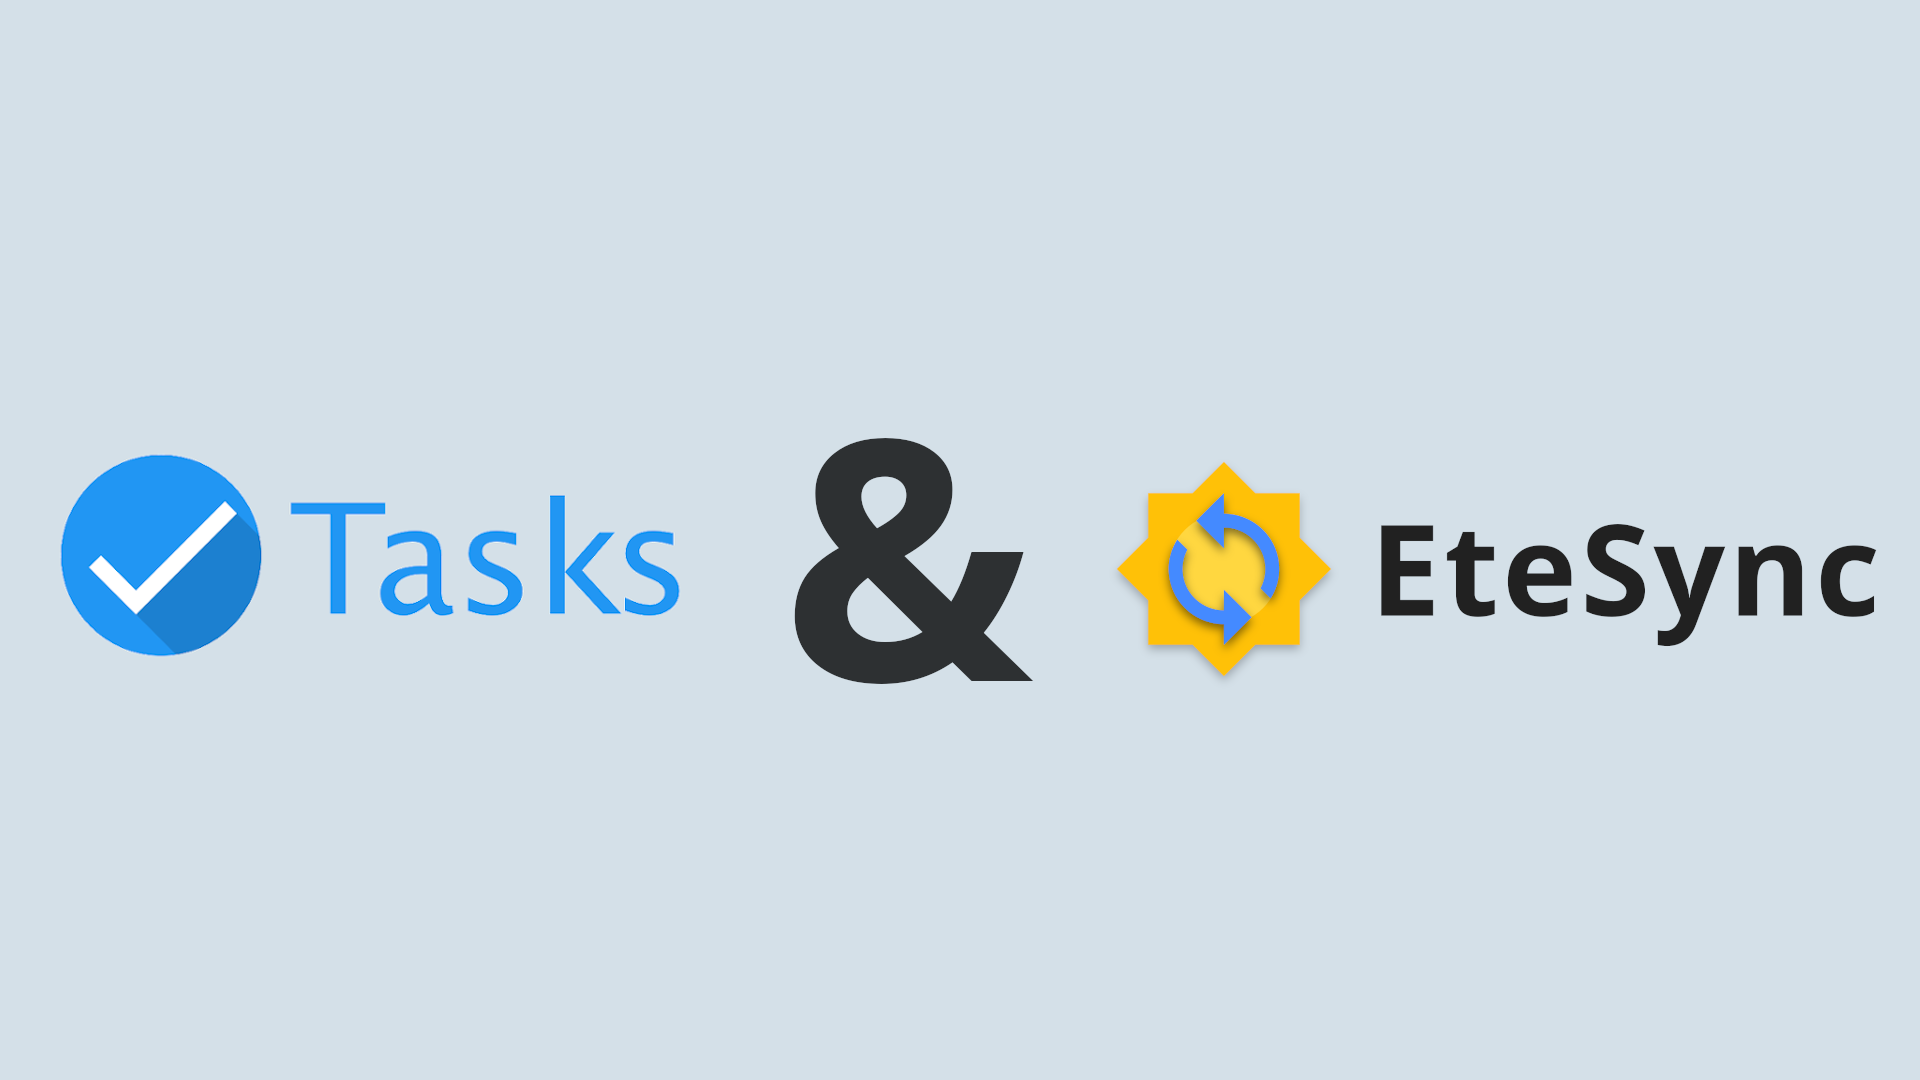 Tasks.org Adds EteSync Support